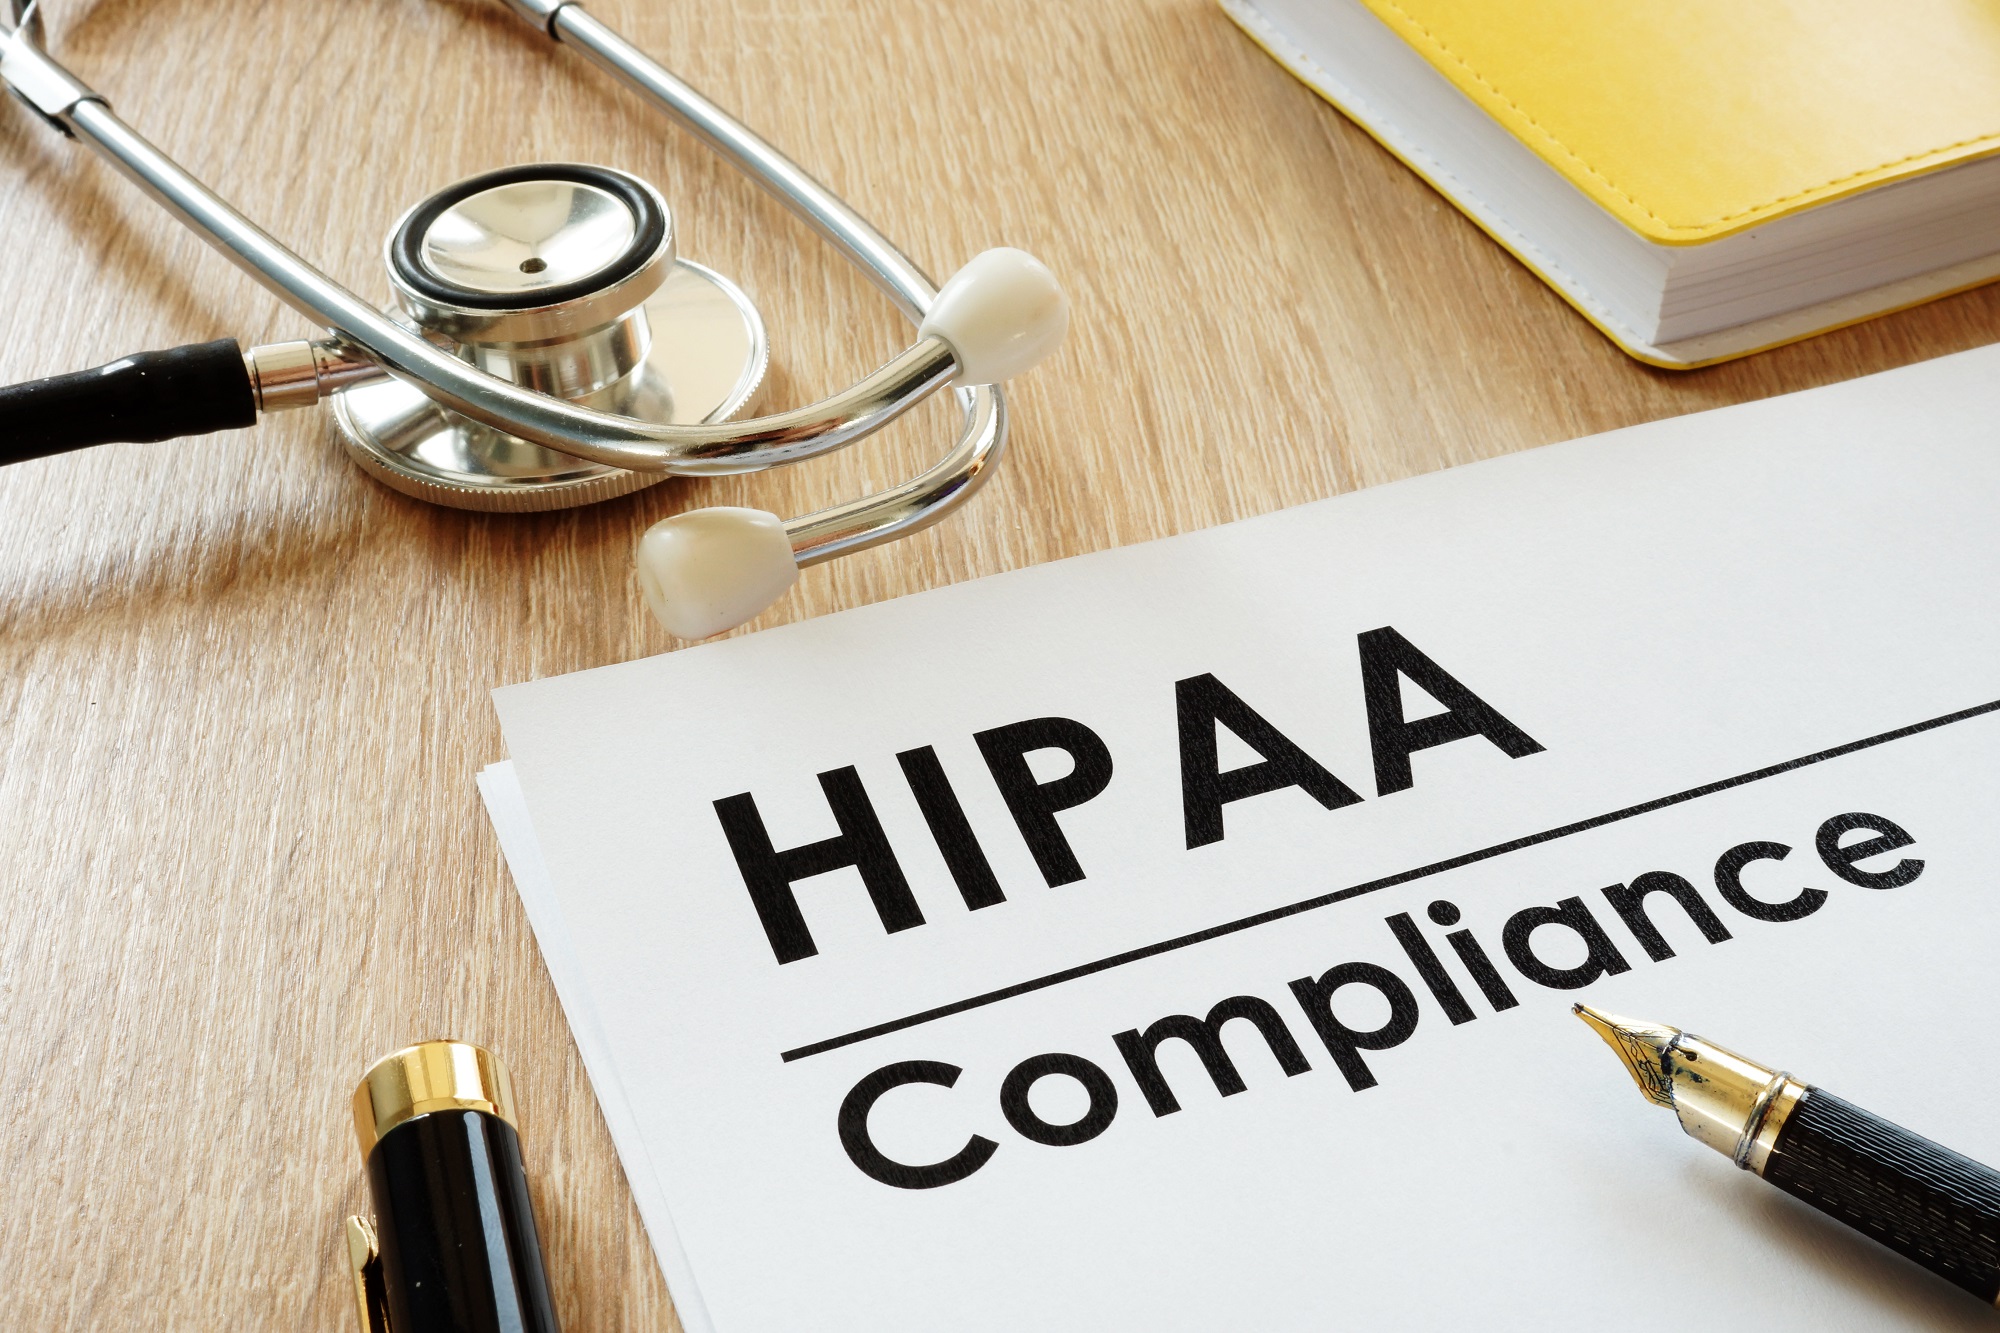 5 Ways To Keep Your Email HIPAA Compliant